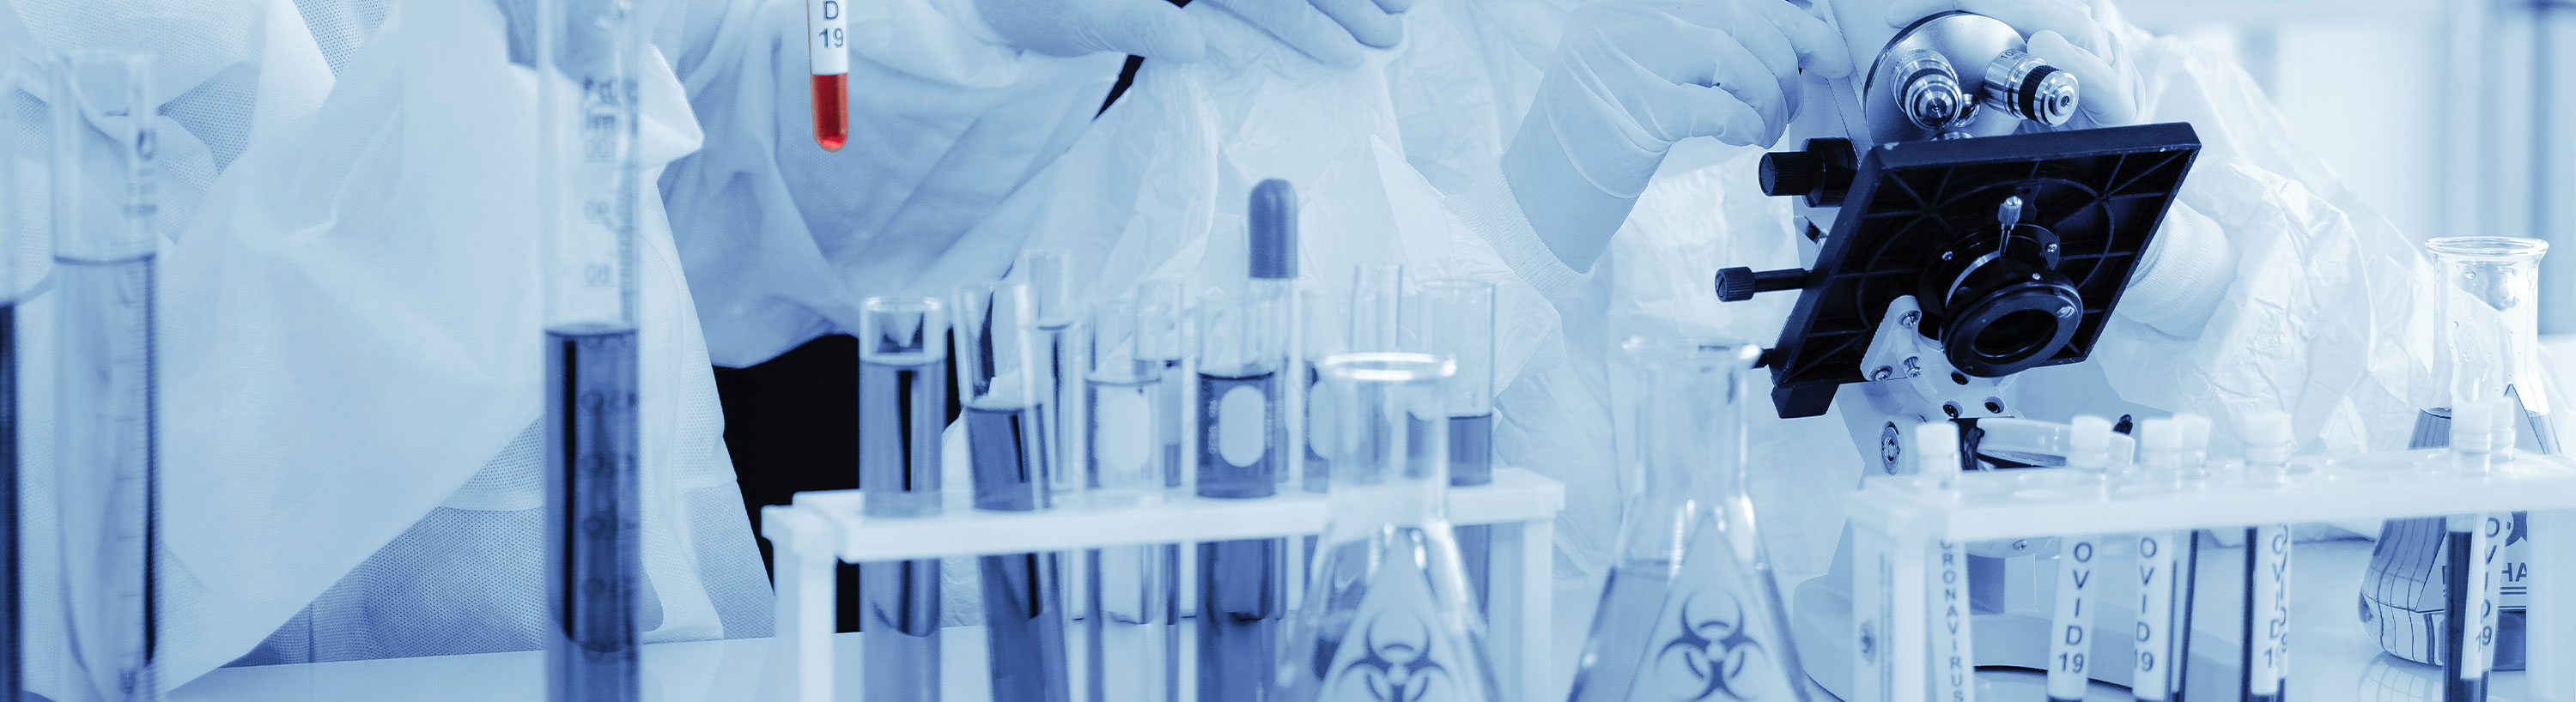 Banner Picture of a Laboratory. There is test tubes, lab equipment, and hands in gloves touching a Microscope